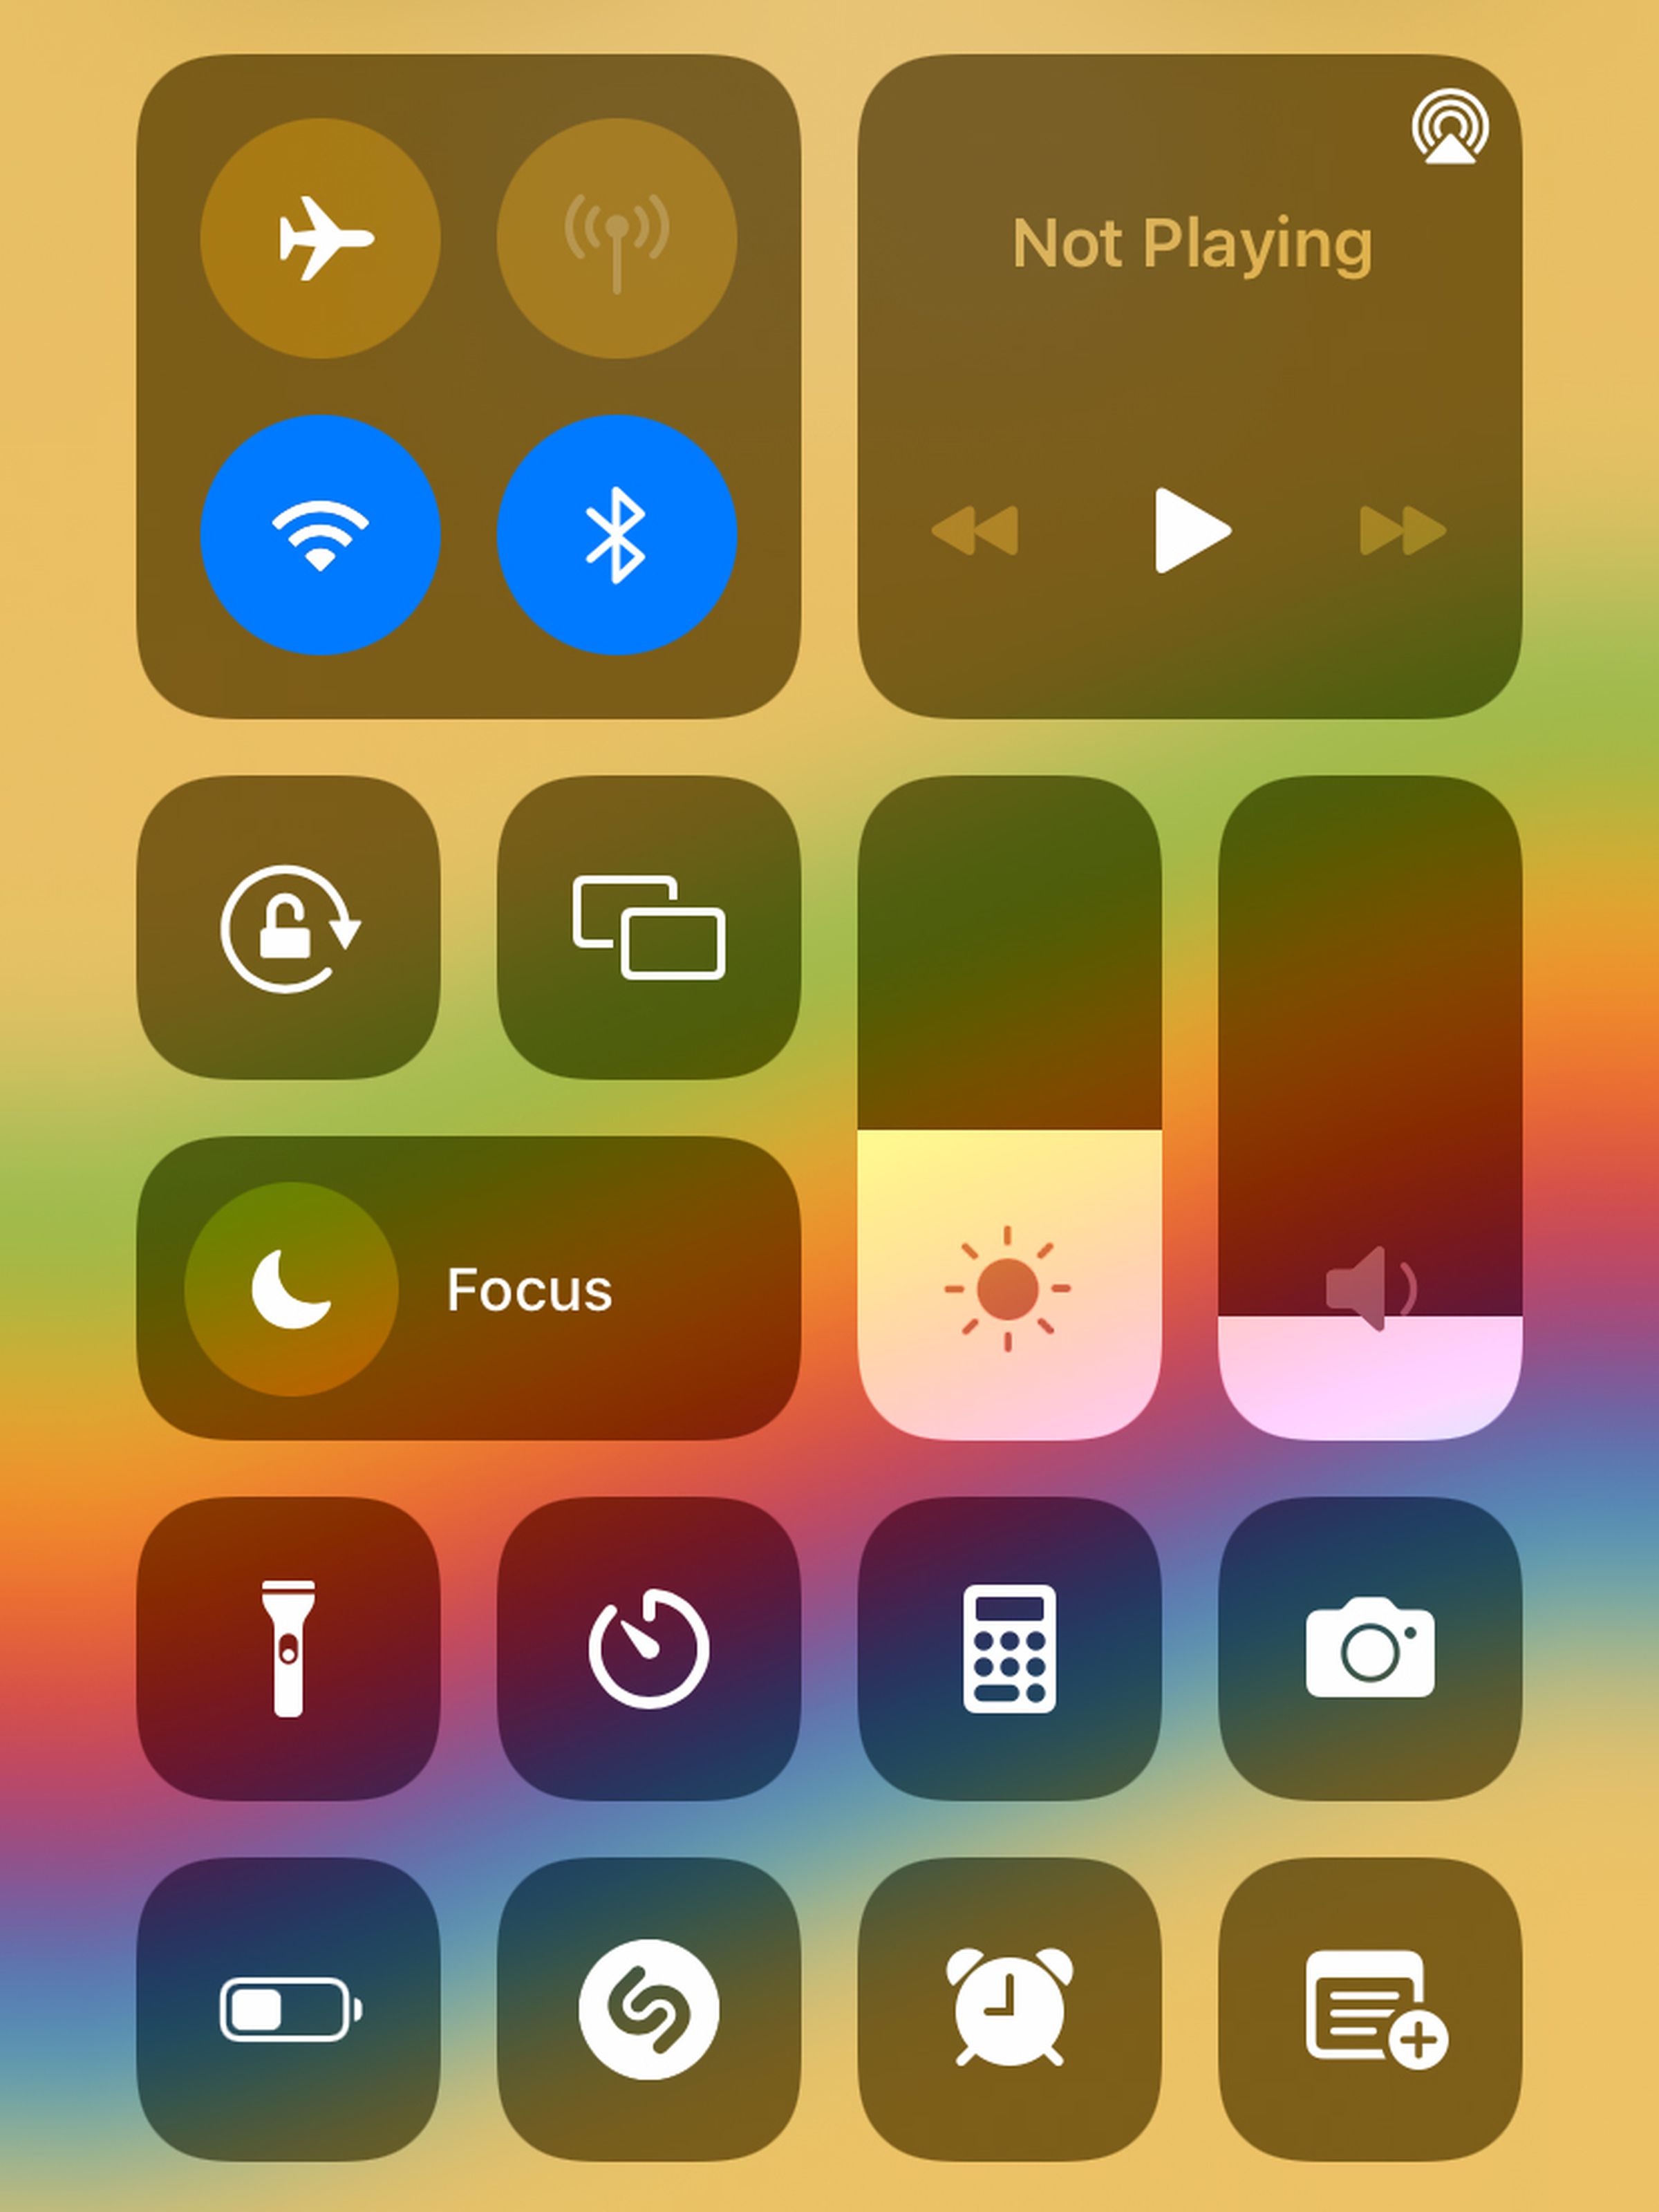 Control center lets you toggle quick settings and access certain features from the lock screen.